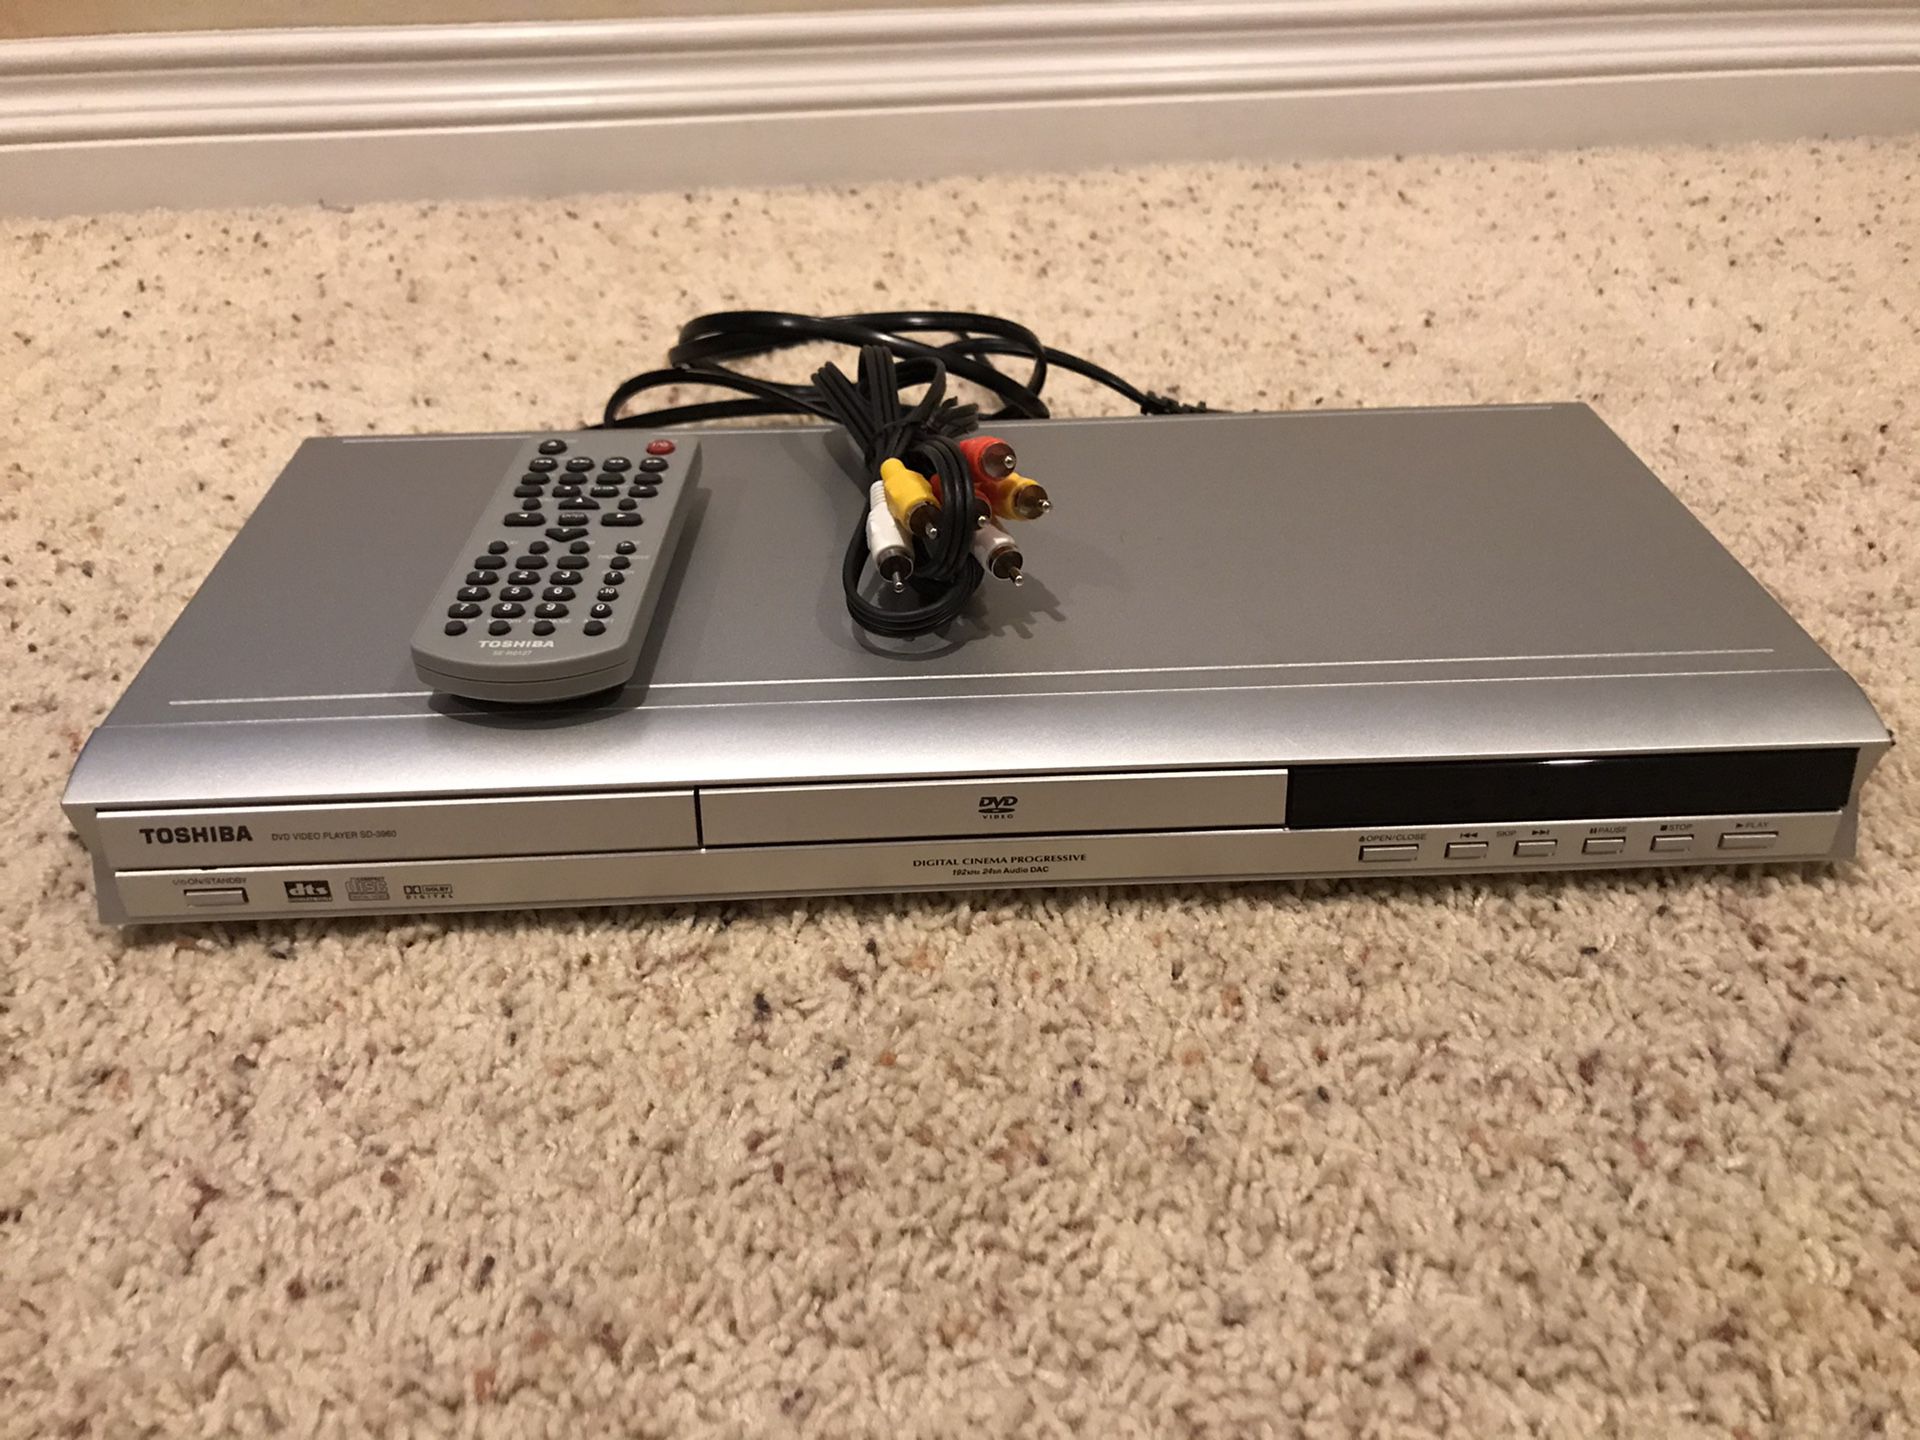 Toshiba DVD player with remote control and RCA wiring harness